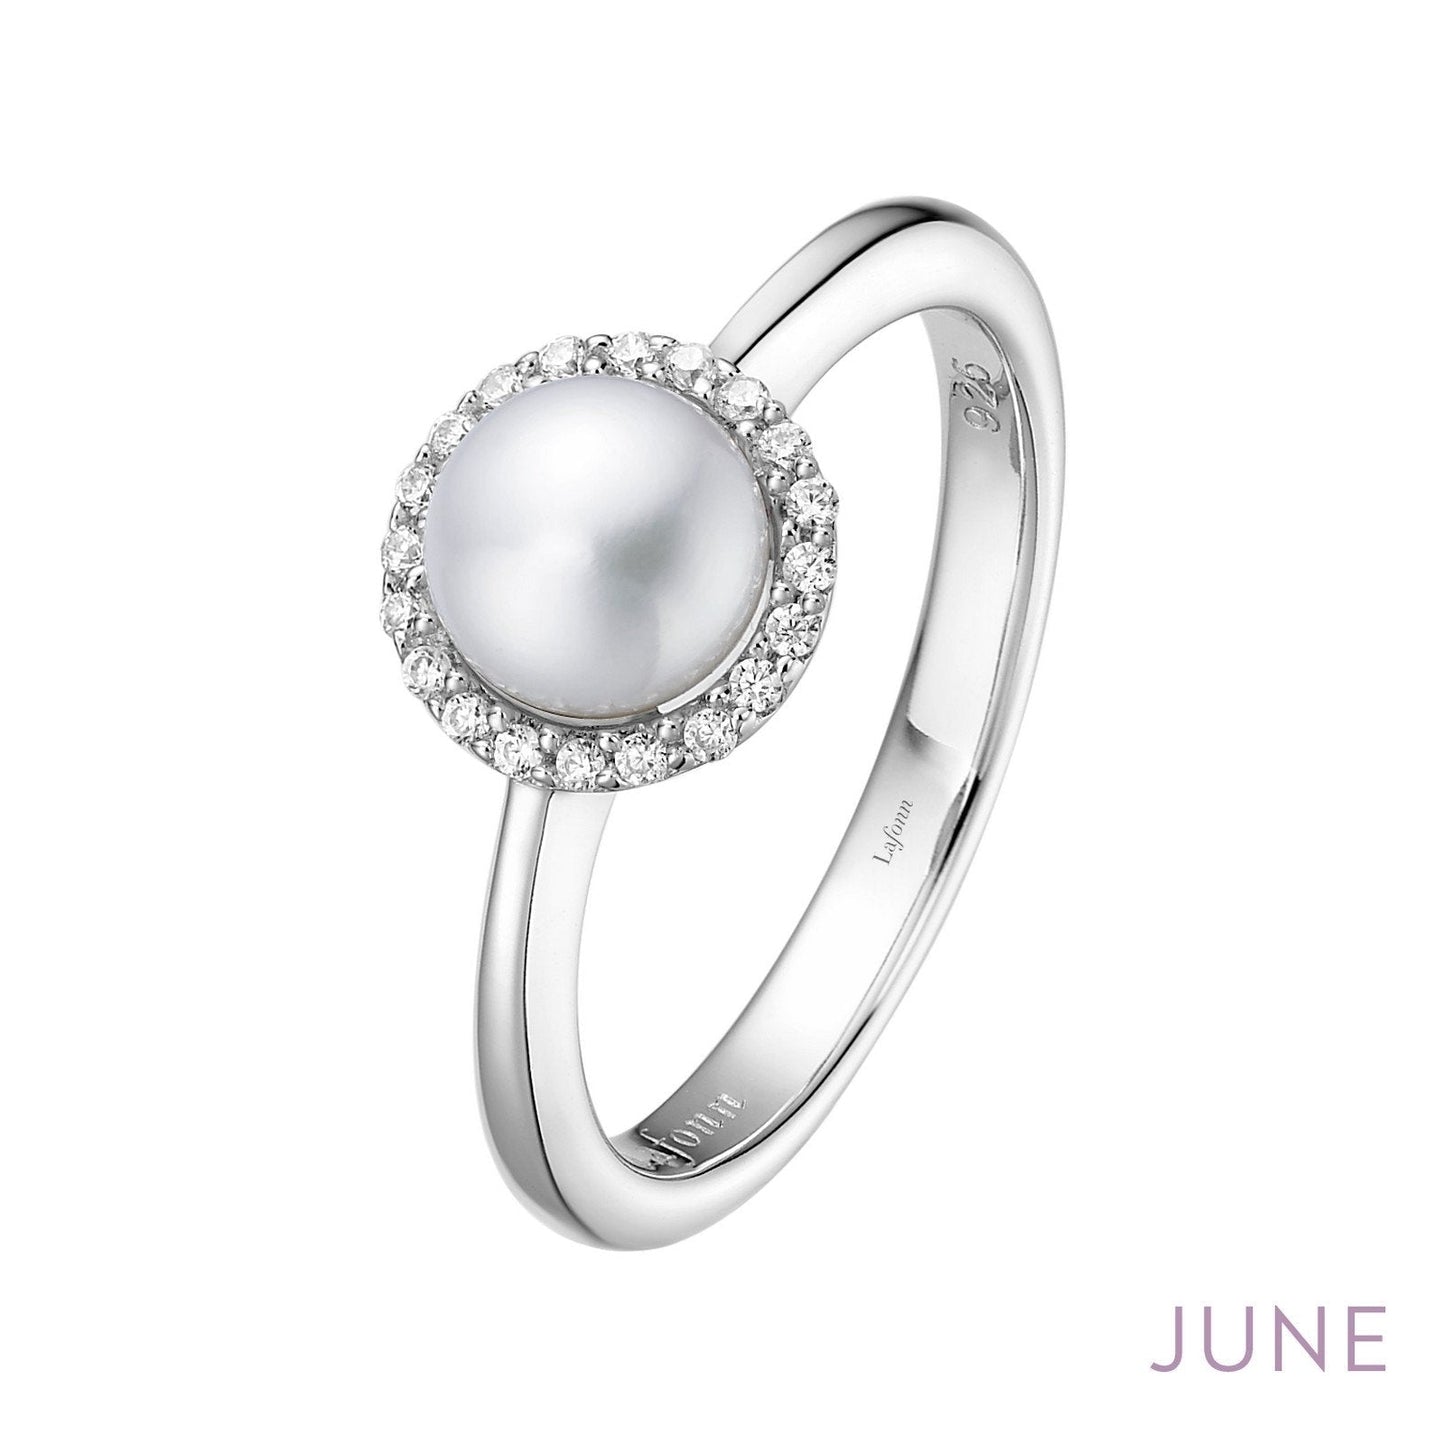 Lafonn June Birthstone Ring JUNE RINGS Size 6 Platinum Cultured Freshwater Pearl: 6mm.   Lassaire simulated diamonds: 0.20 cts. CTS 